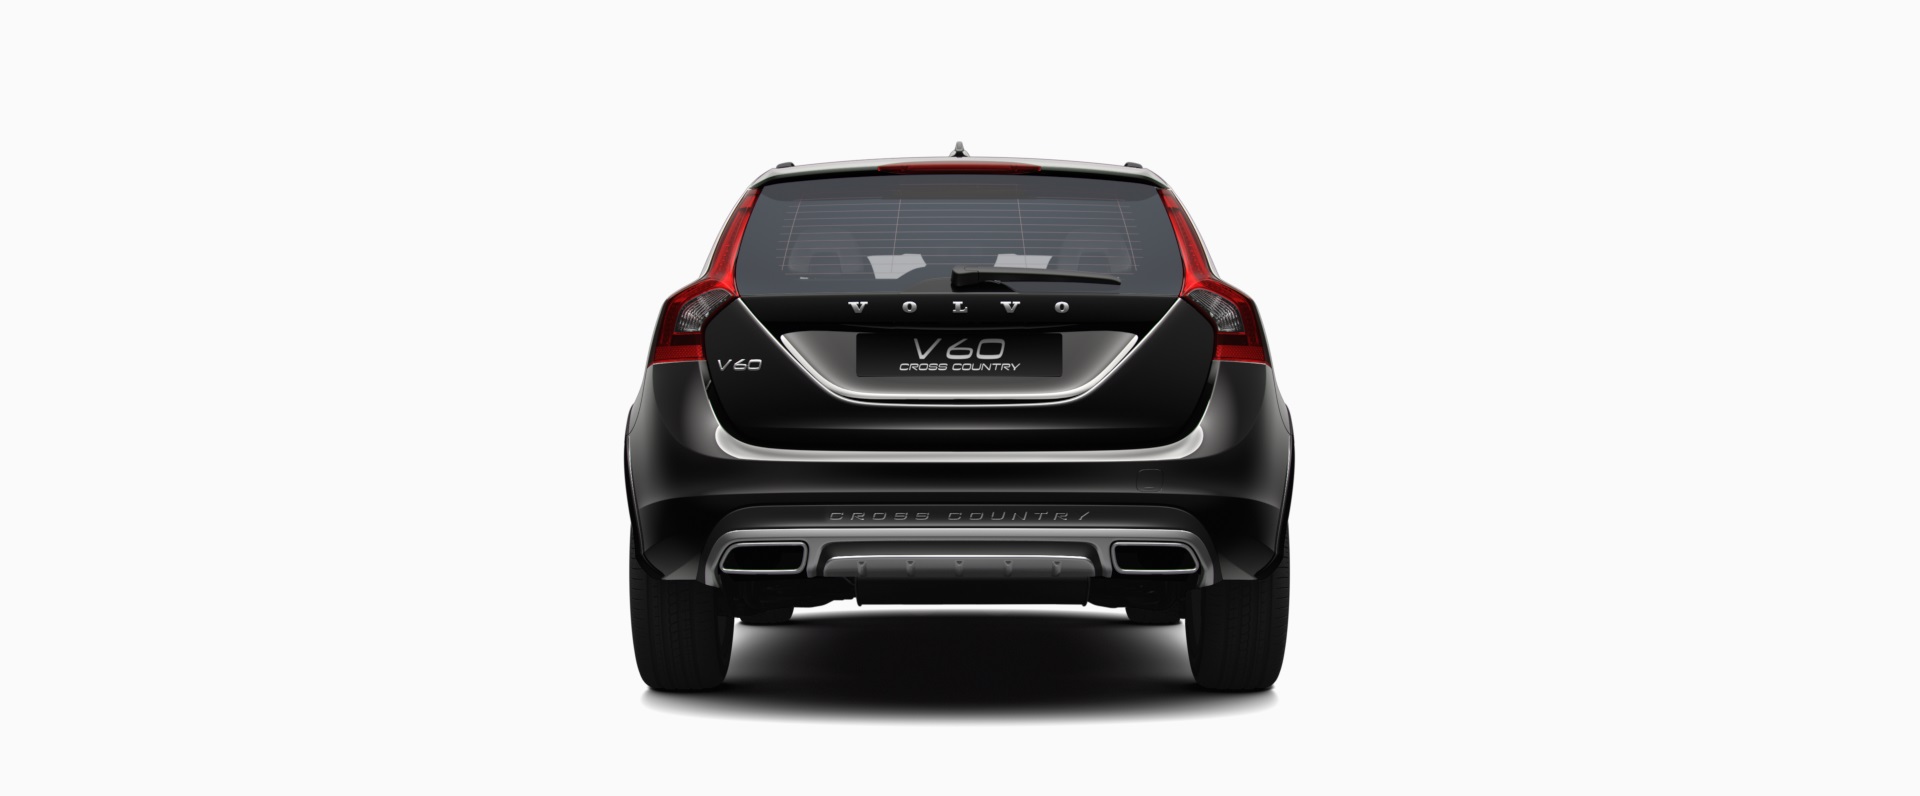 Volvo V60 Cross Country T5 AWD rear view